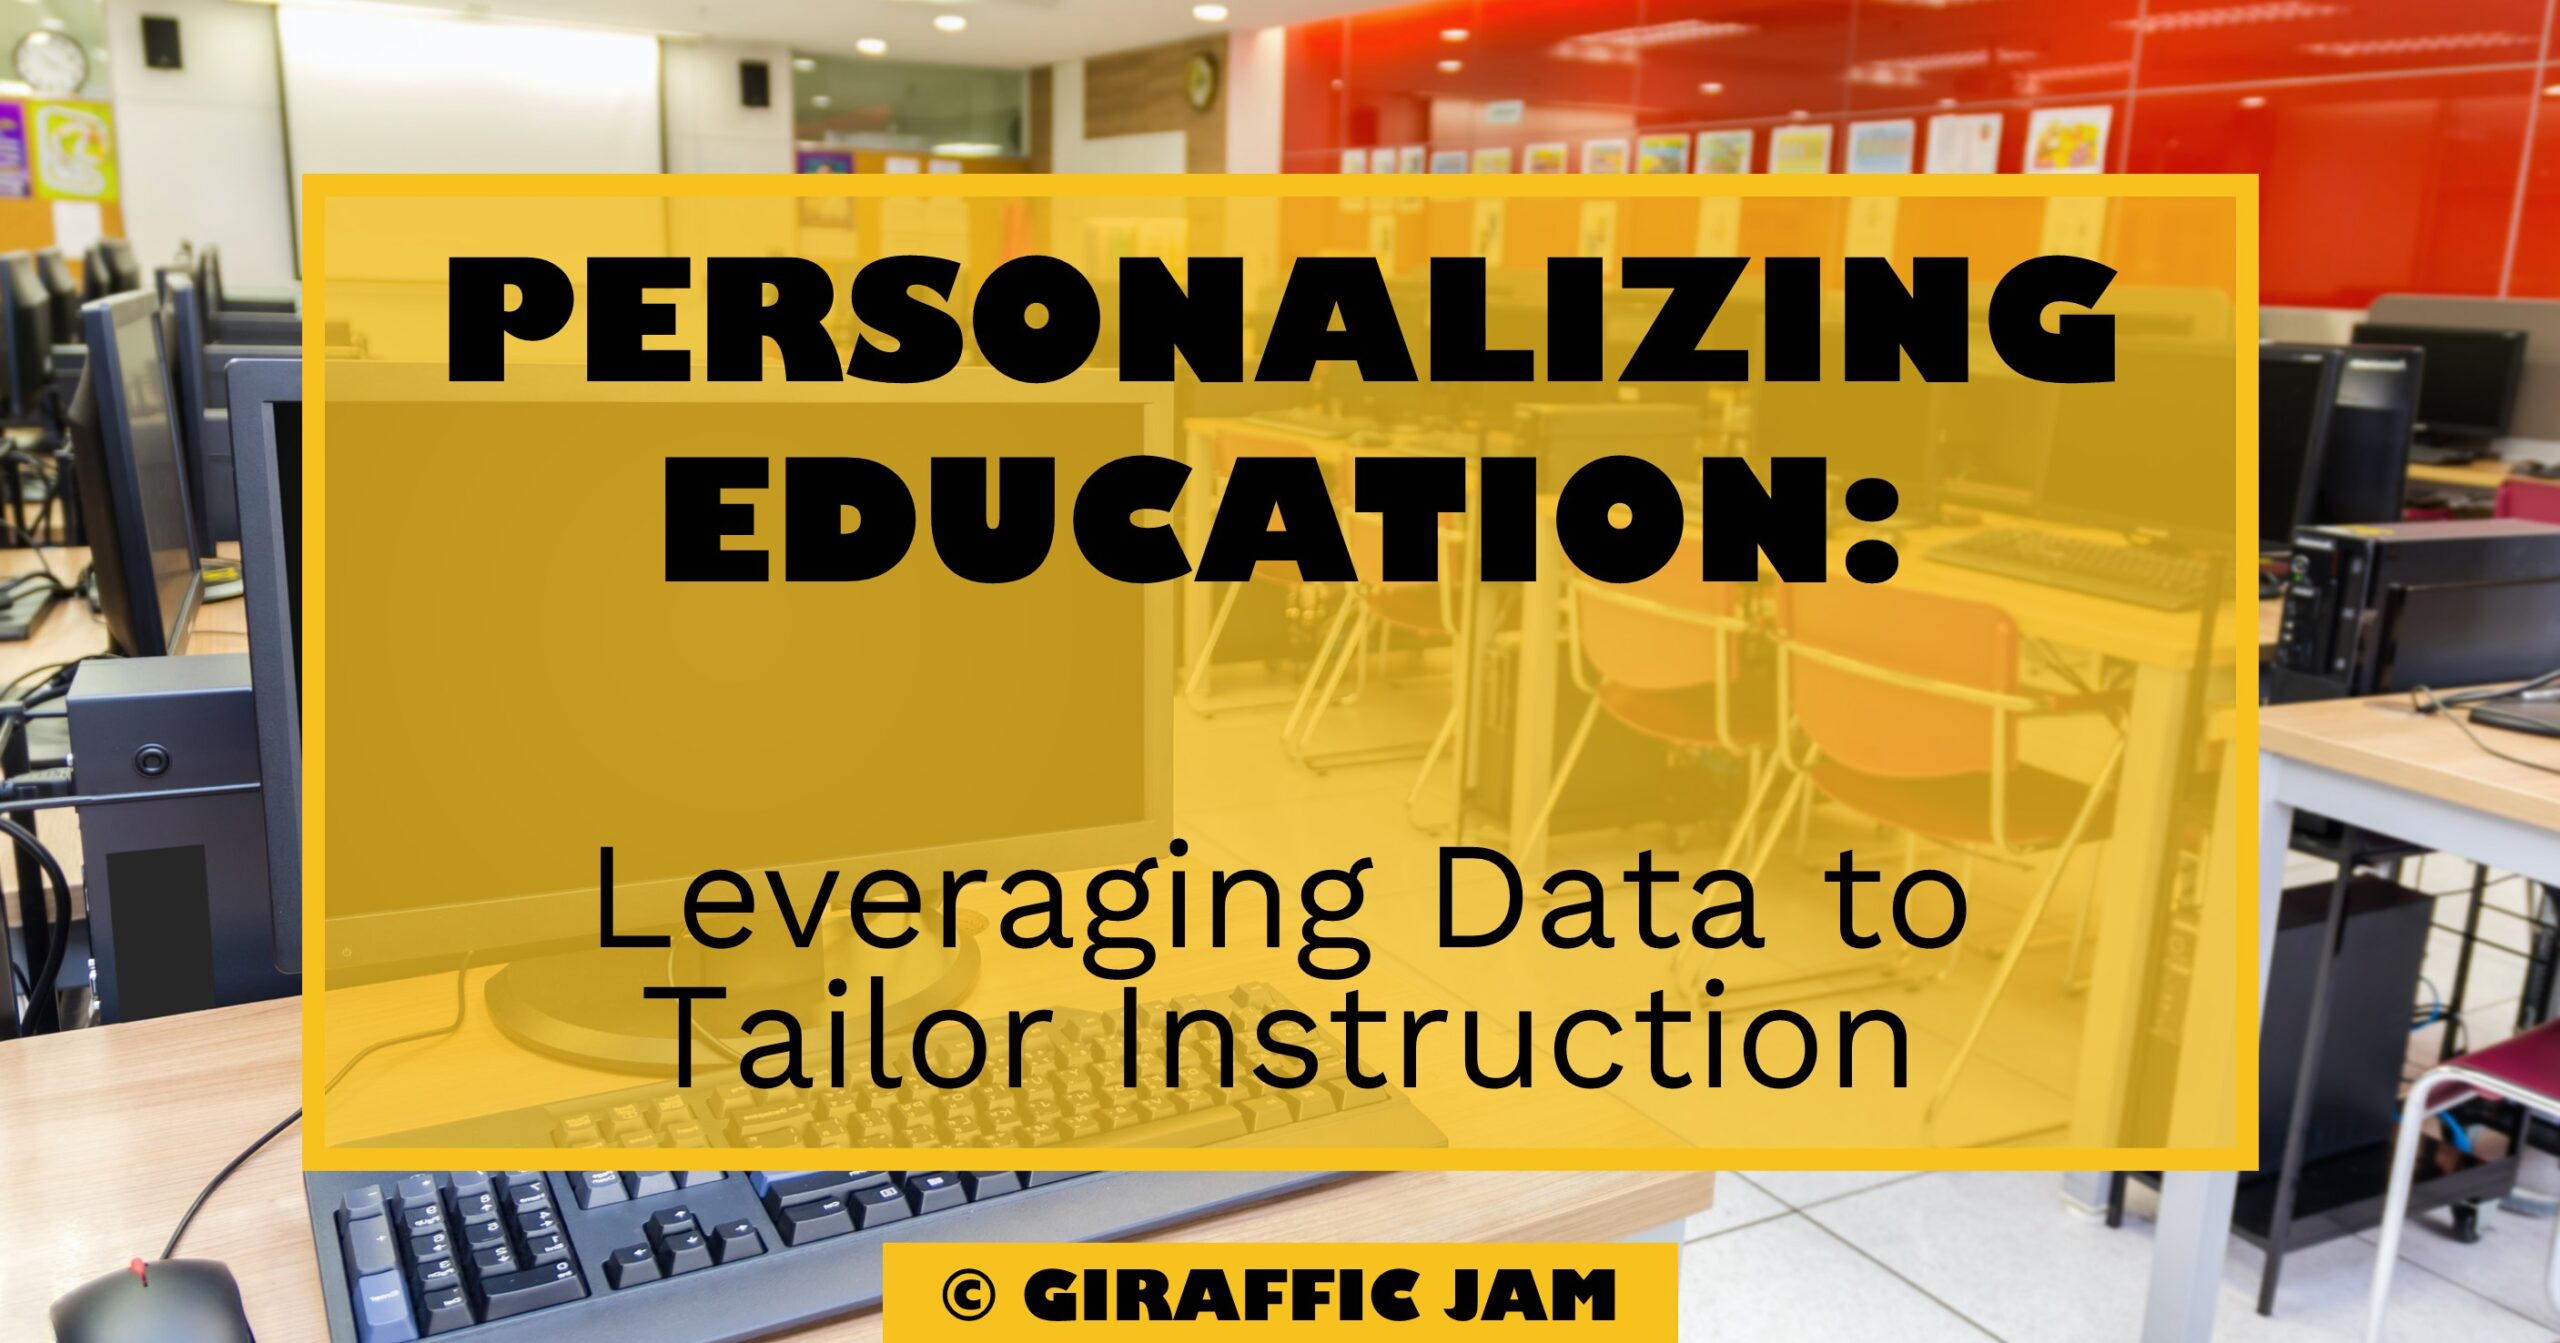 Personalizing Education Blog Post Title